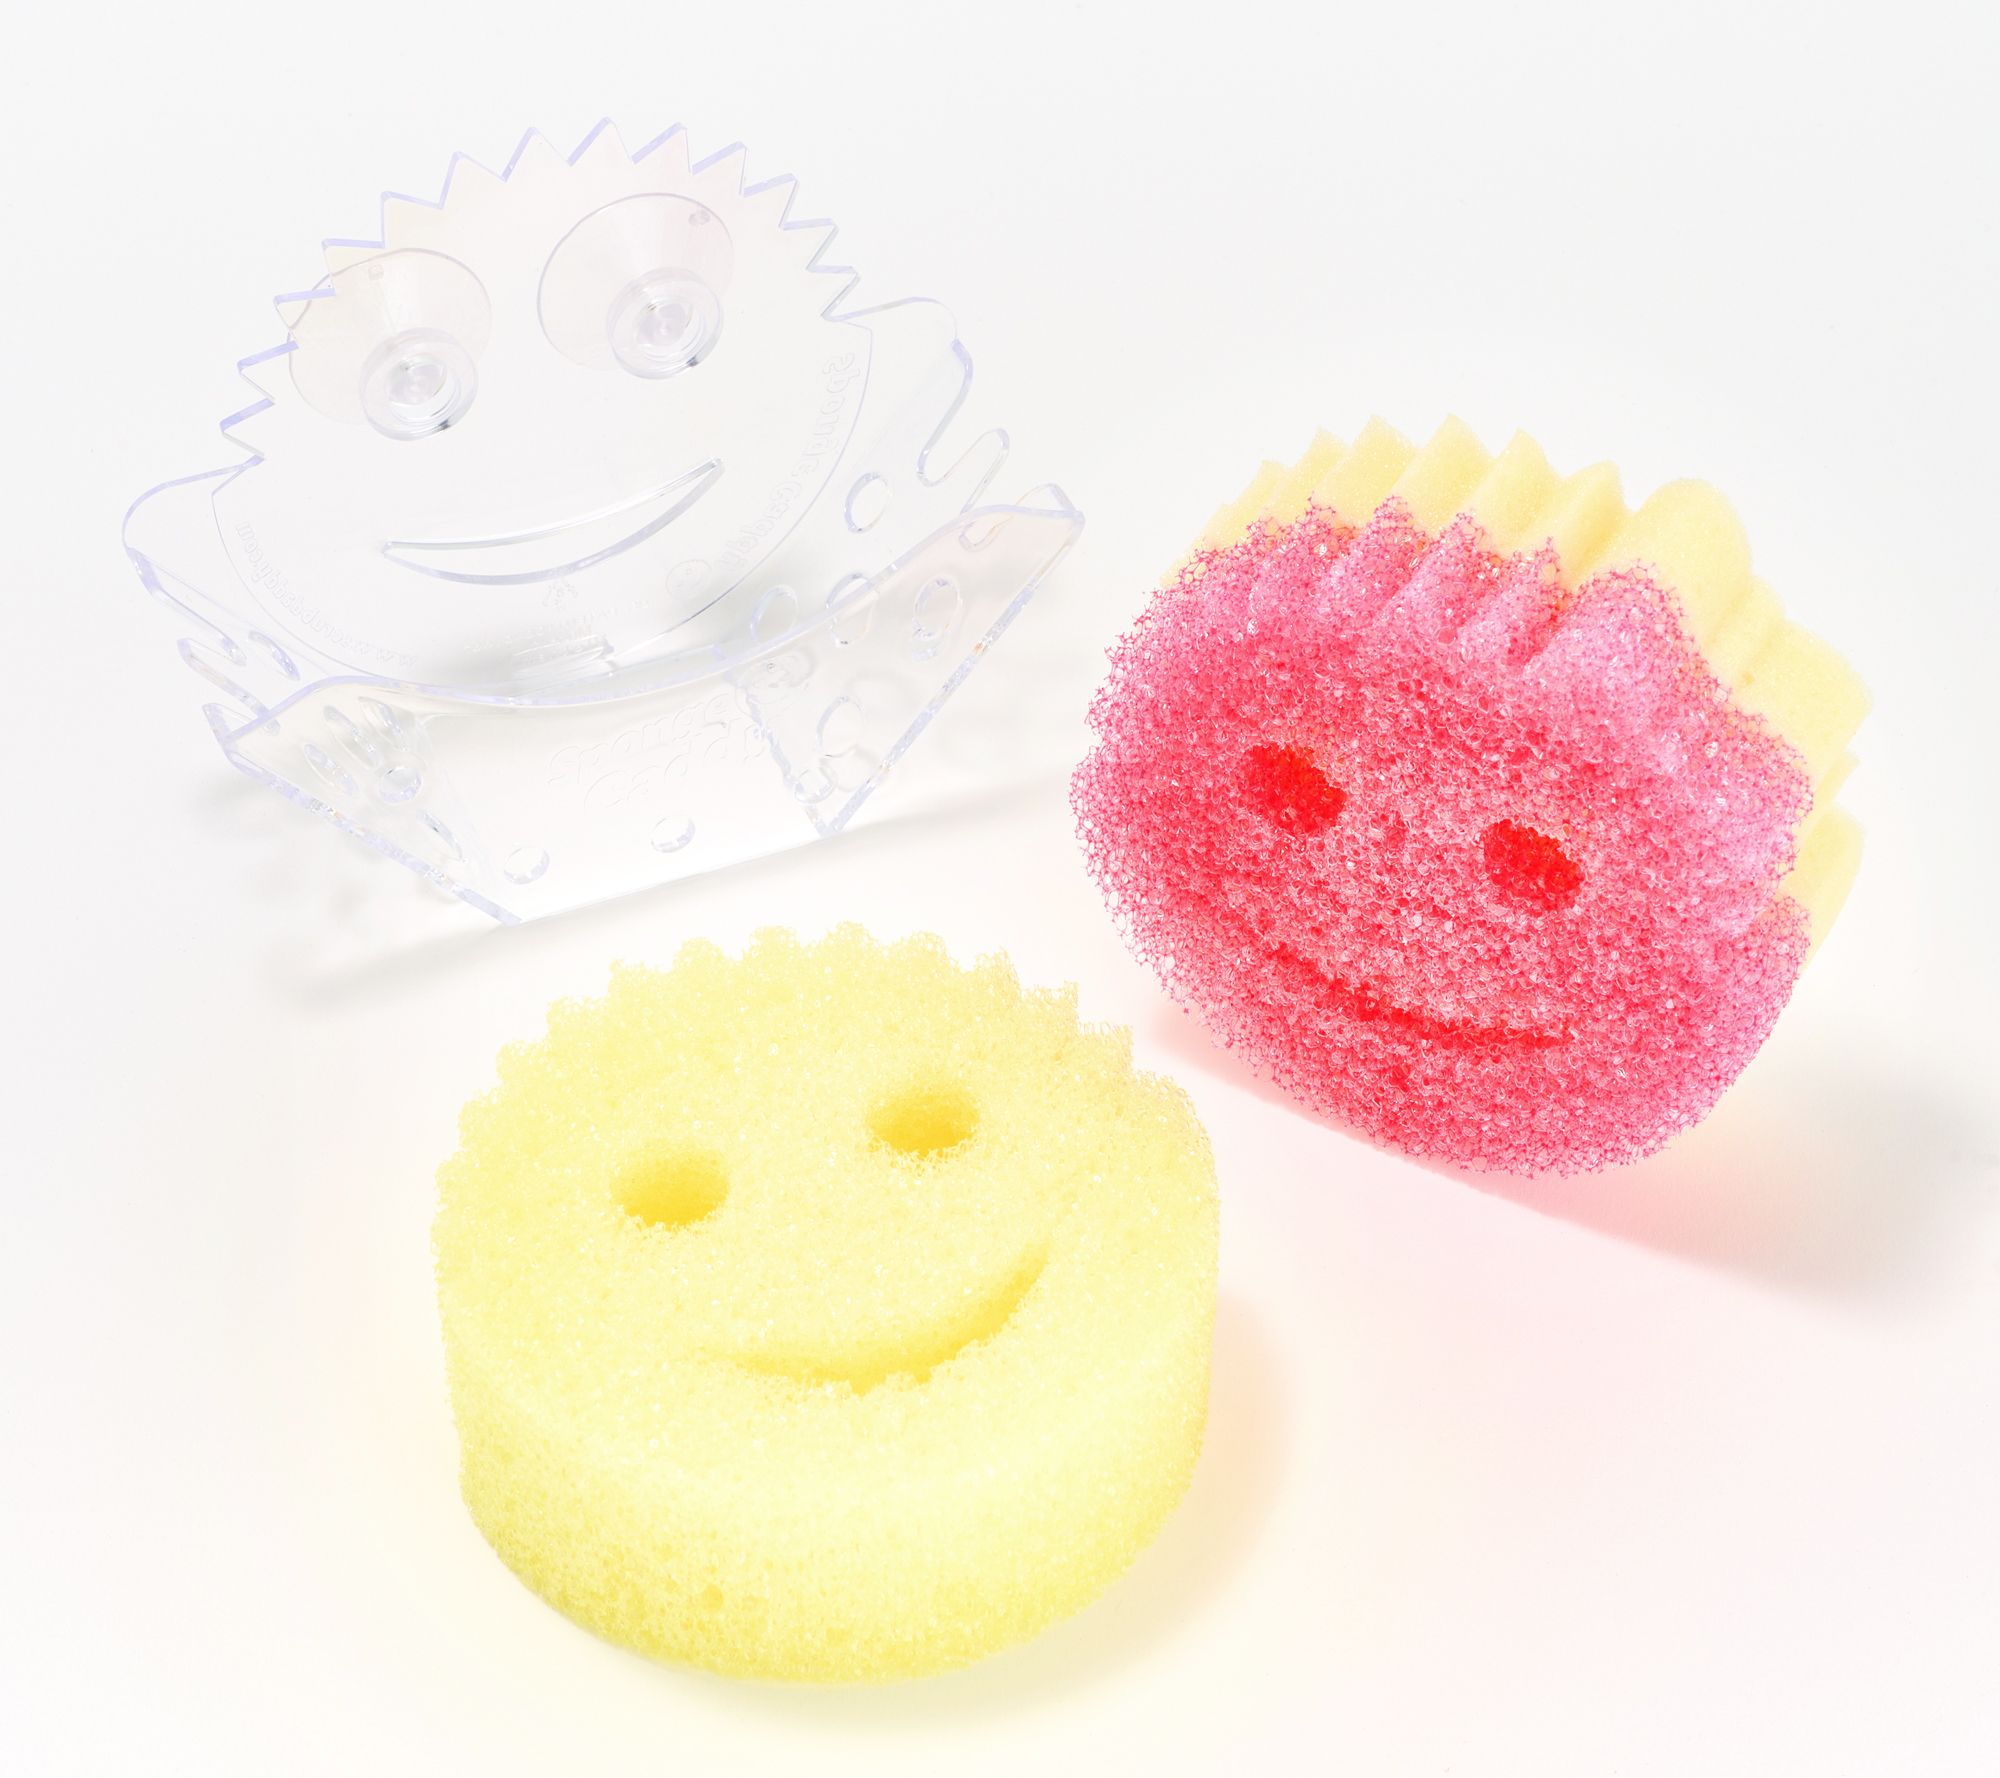 Scrub Daddy 10 pc Everyday Trial Kit with Eraser, Scour, Sponges & More! 